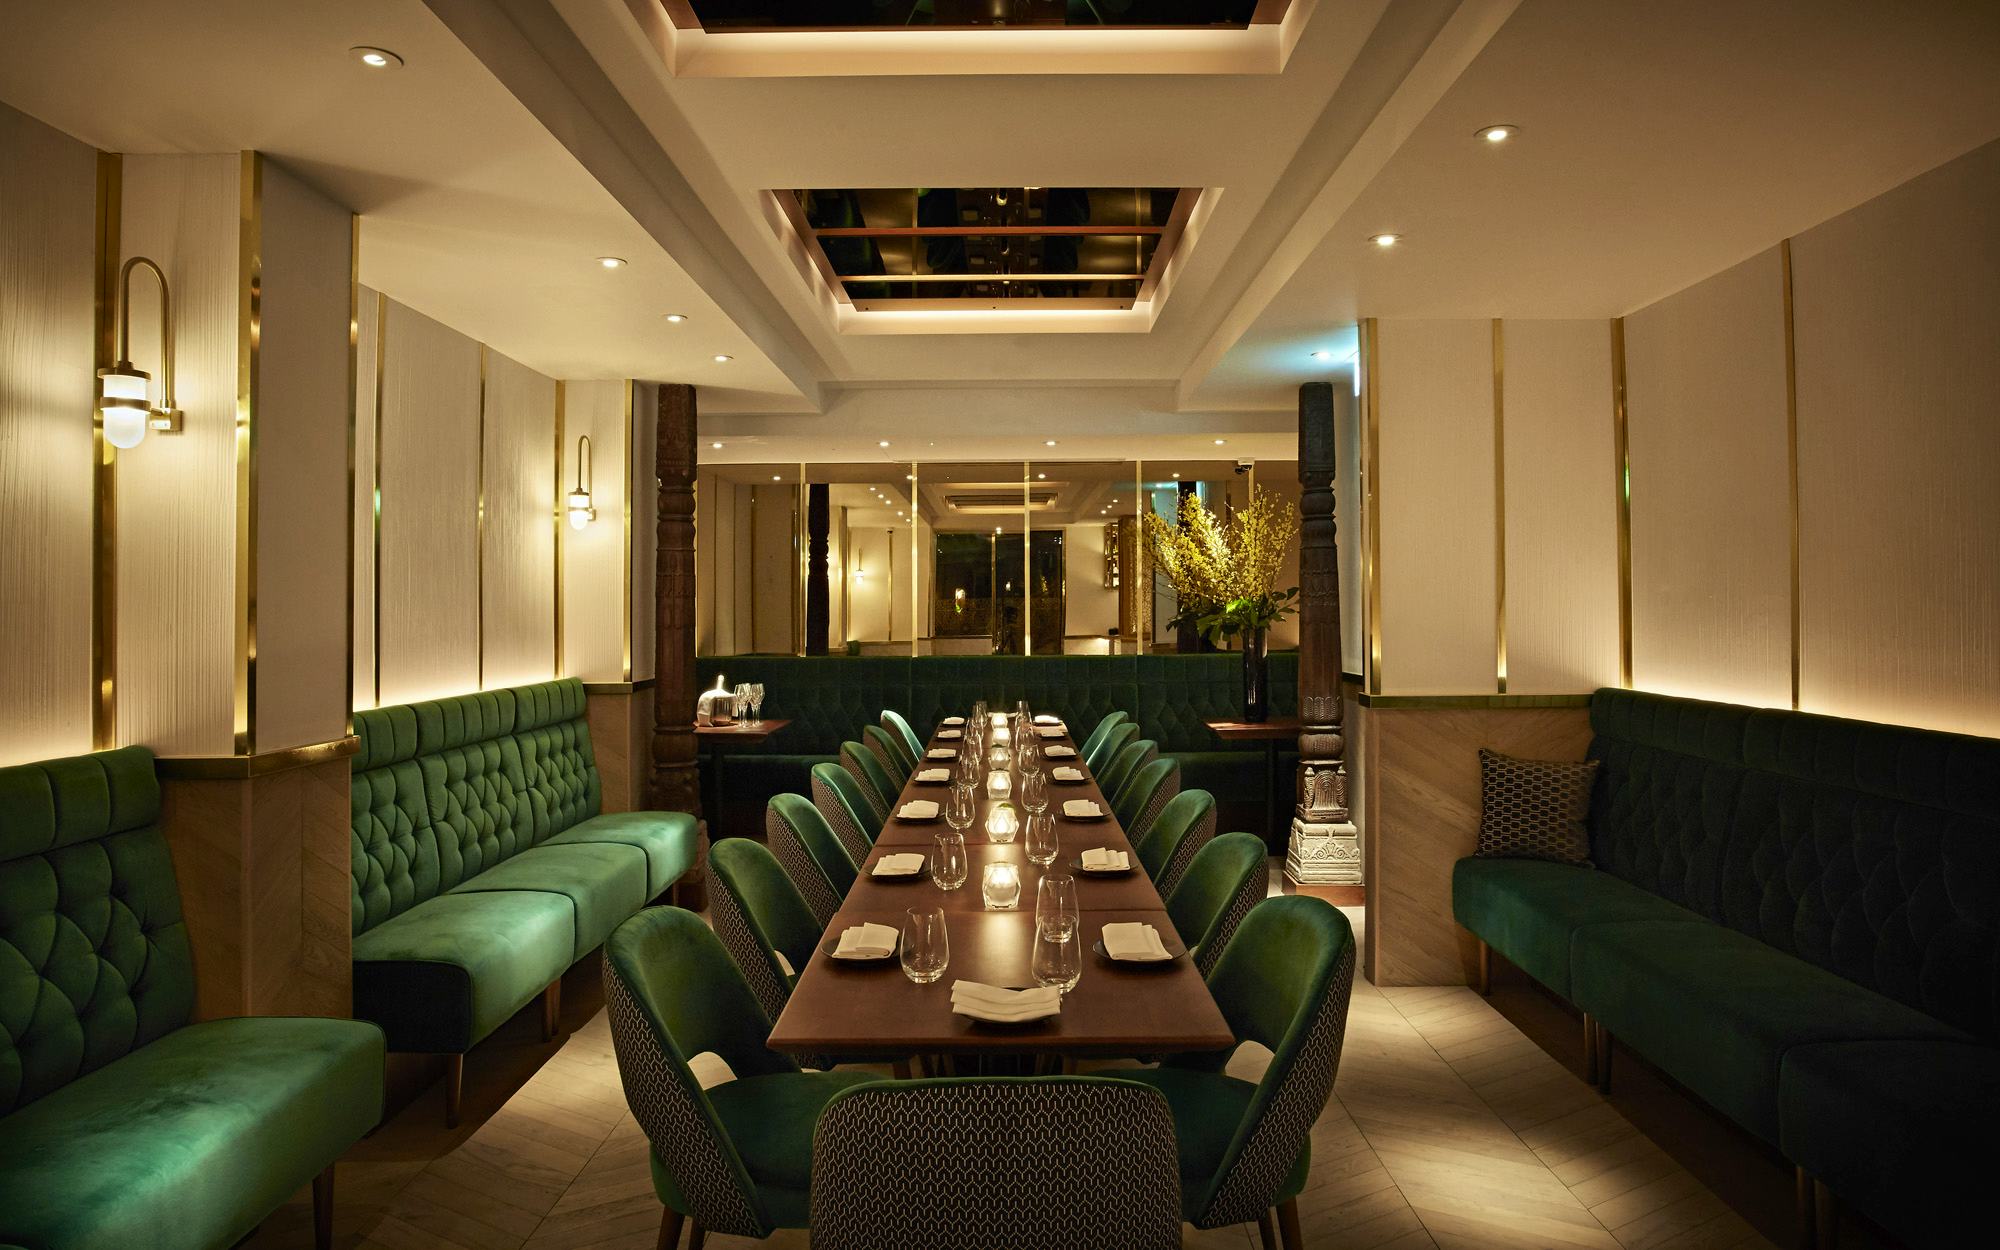 Indian Accent london uk restaurants venues events group bookings private dining room